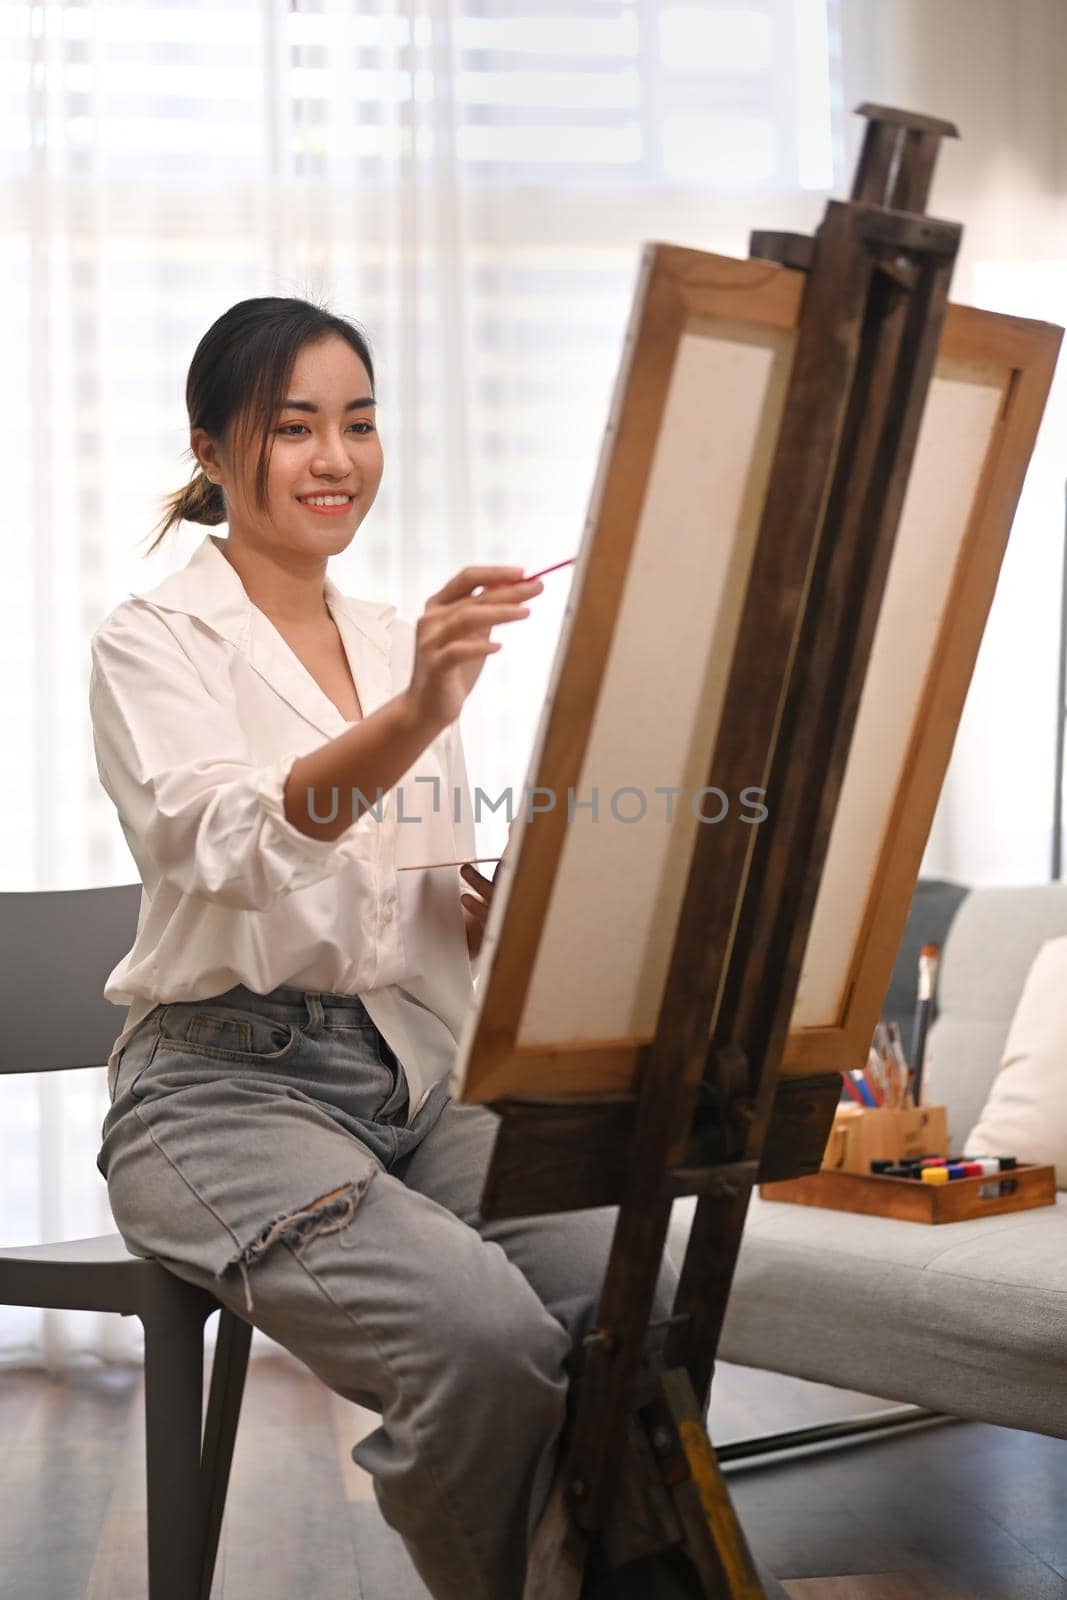 Pleasant millennial woman painting picture on canvas with oil paints in home studio. Leisure activity, creative hobby and art concept.